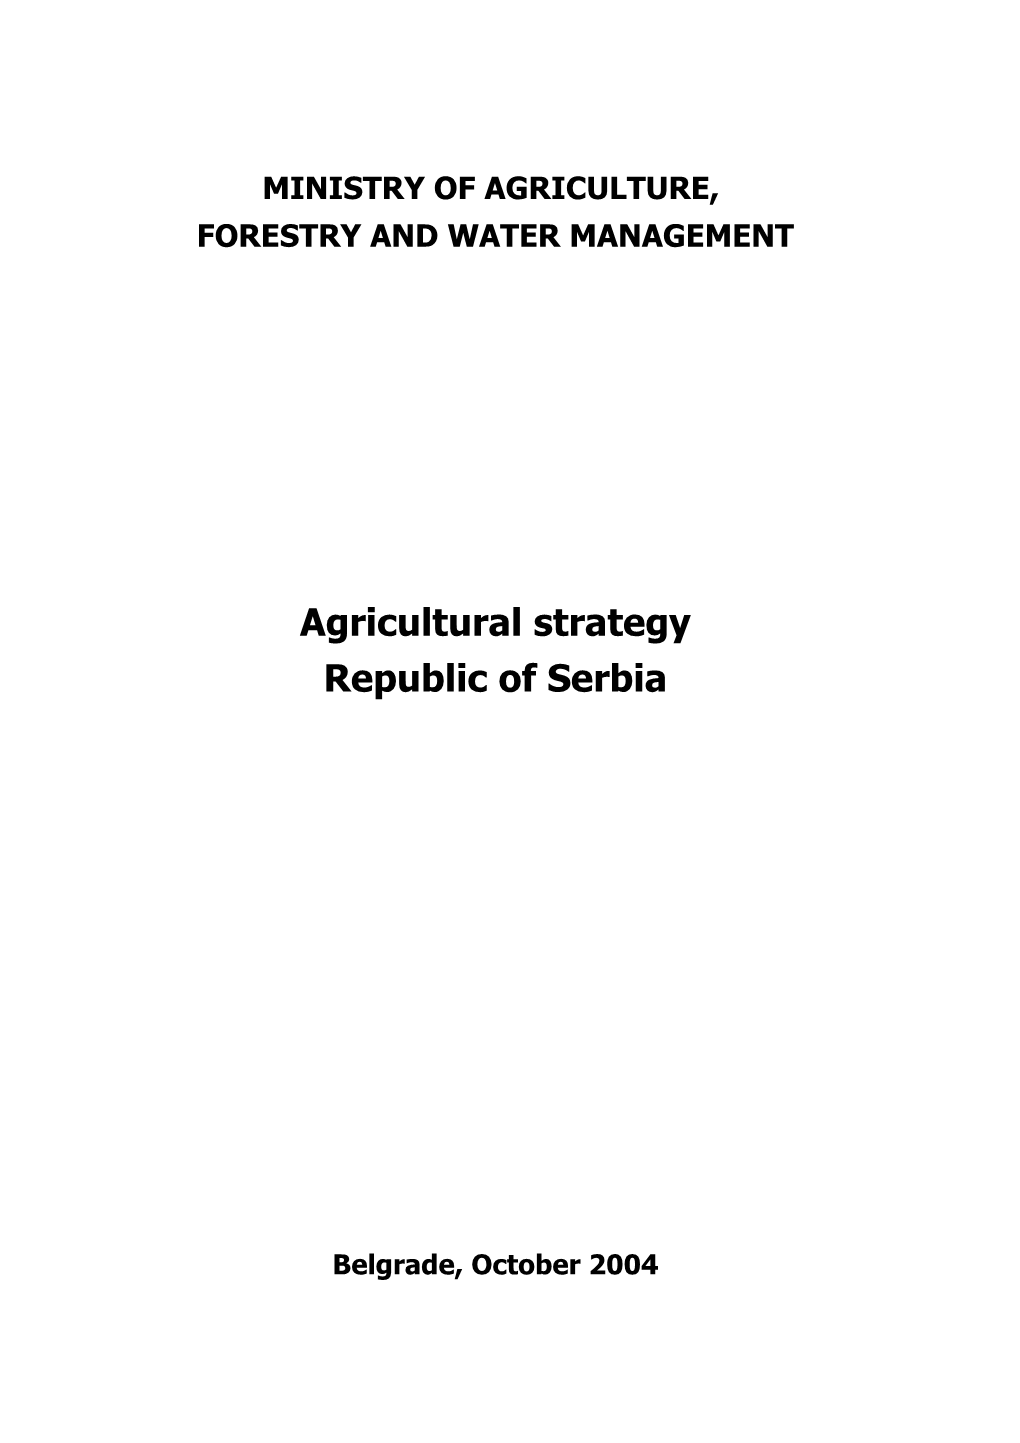 Draft for Discussionagricultural Strategy Republic of Serbia